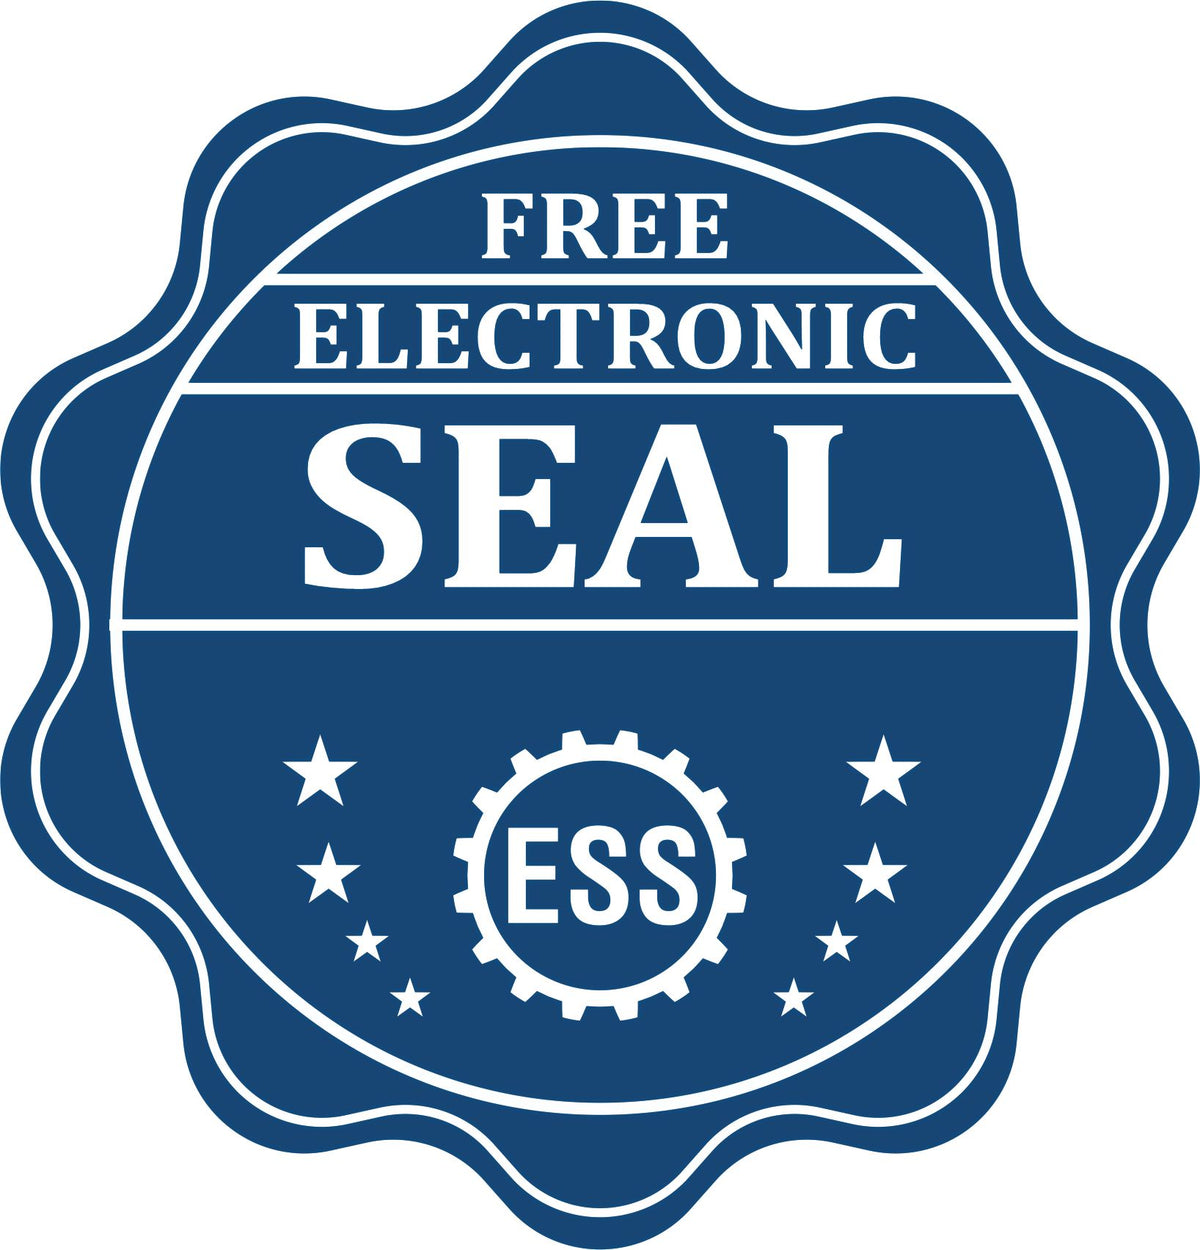 A badge showing a free electronic seal for the Slim Pre-Inked Michigan Professional Geologist Seal Stamp with stars and the ESS gear on the emblem.